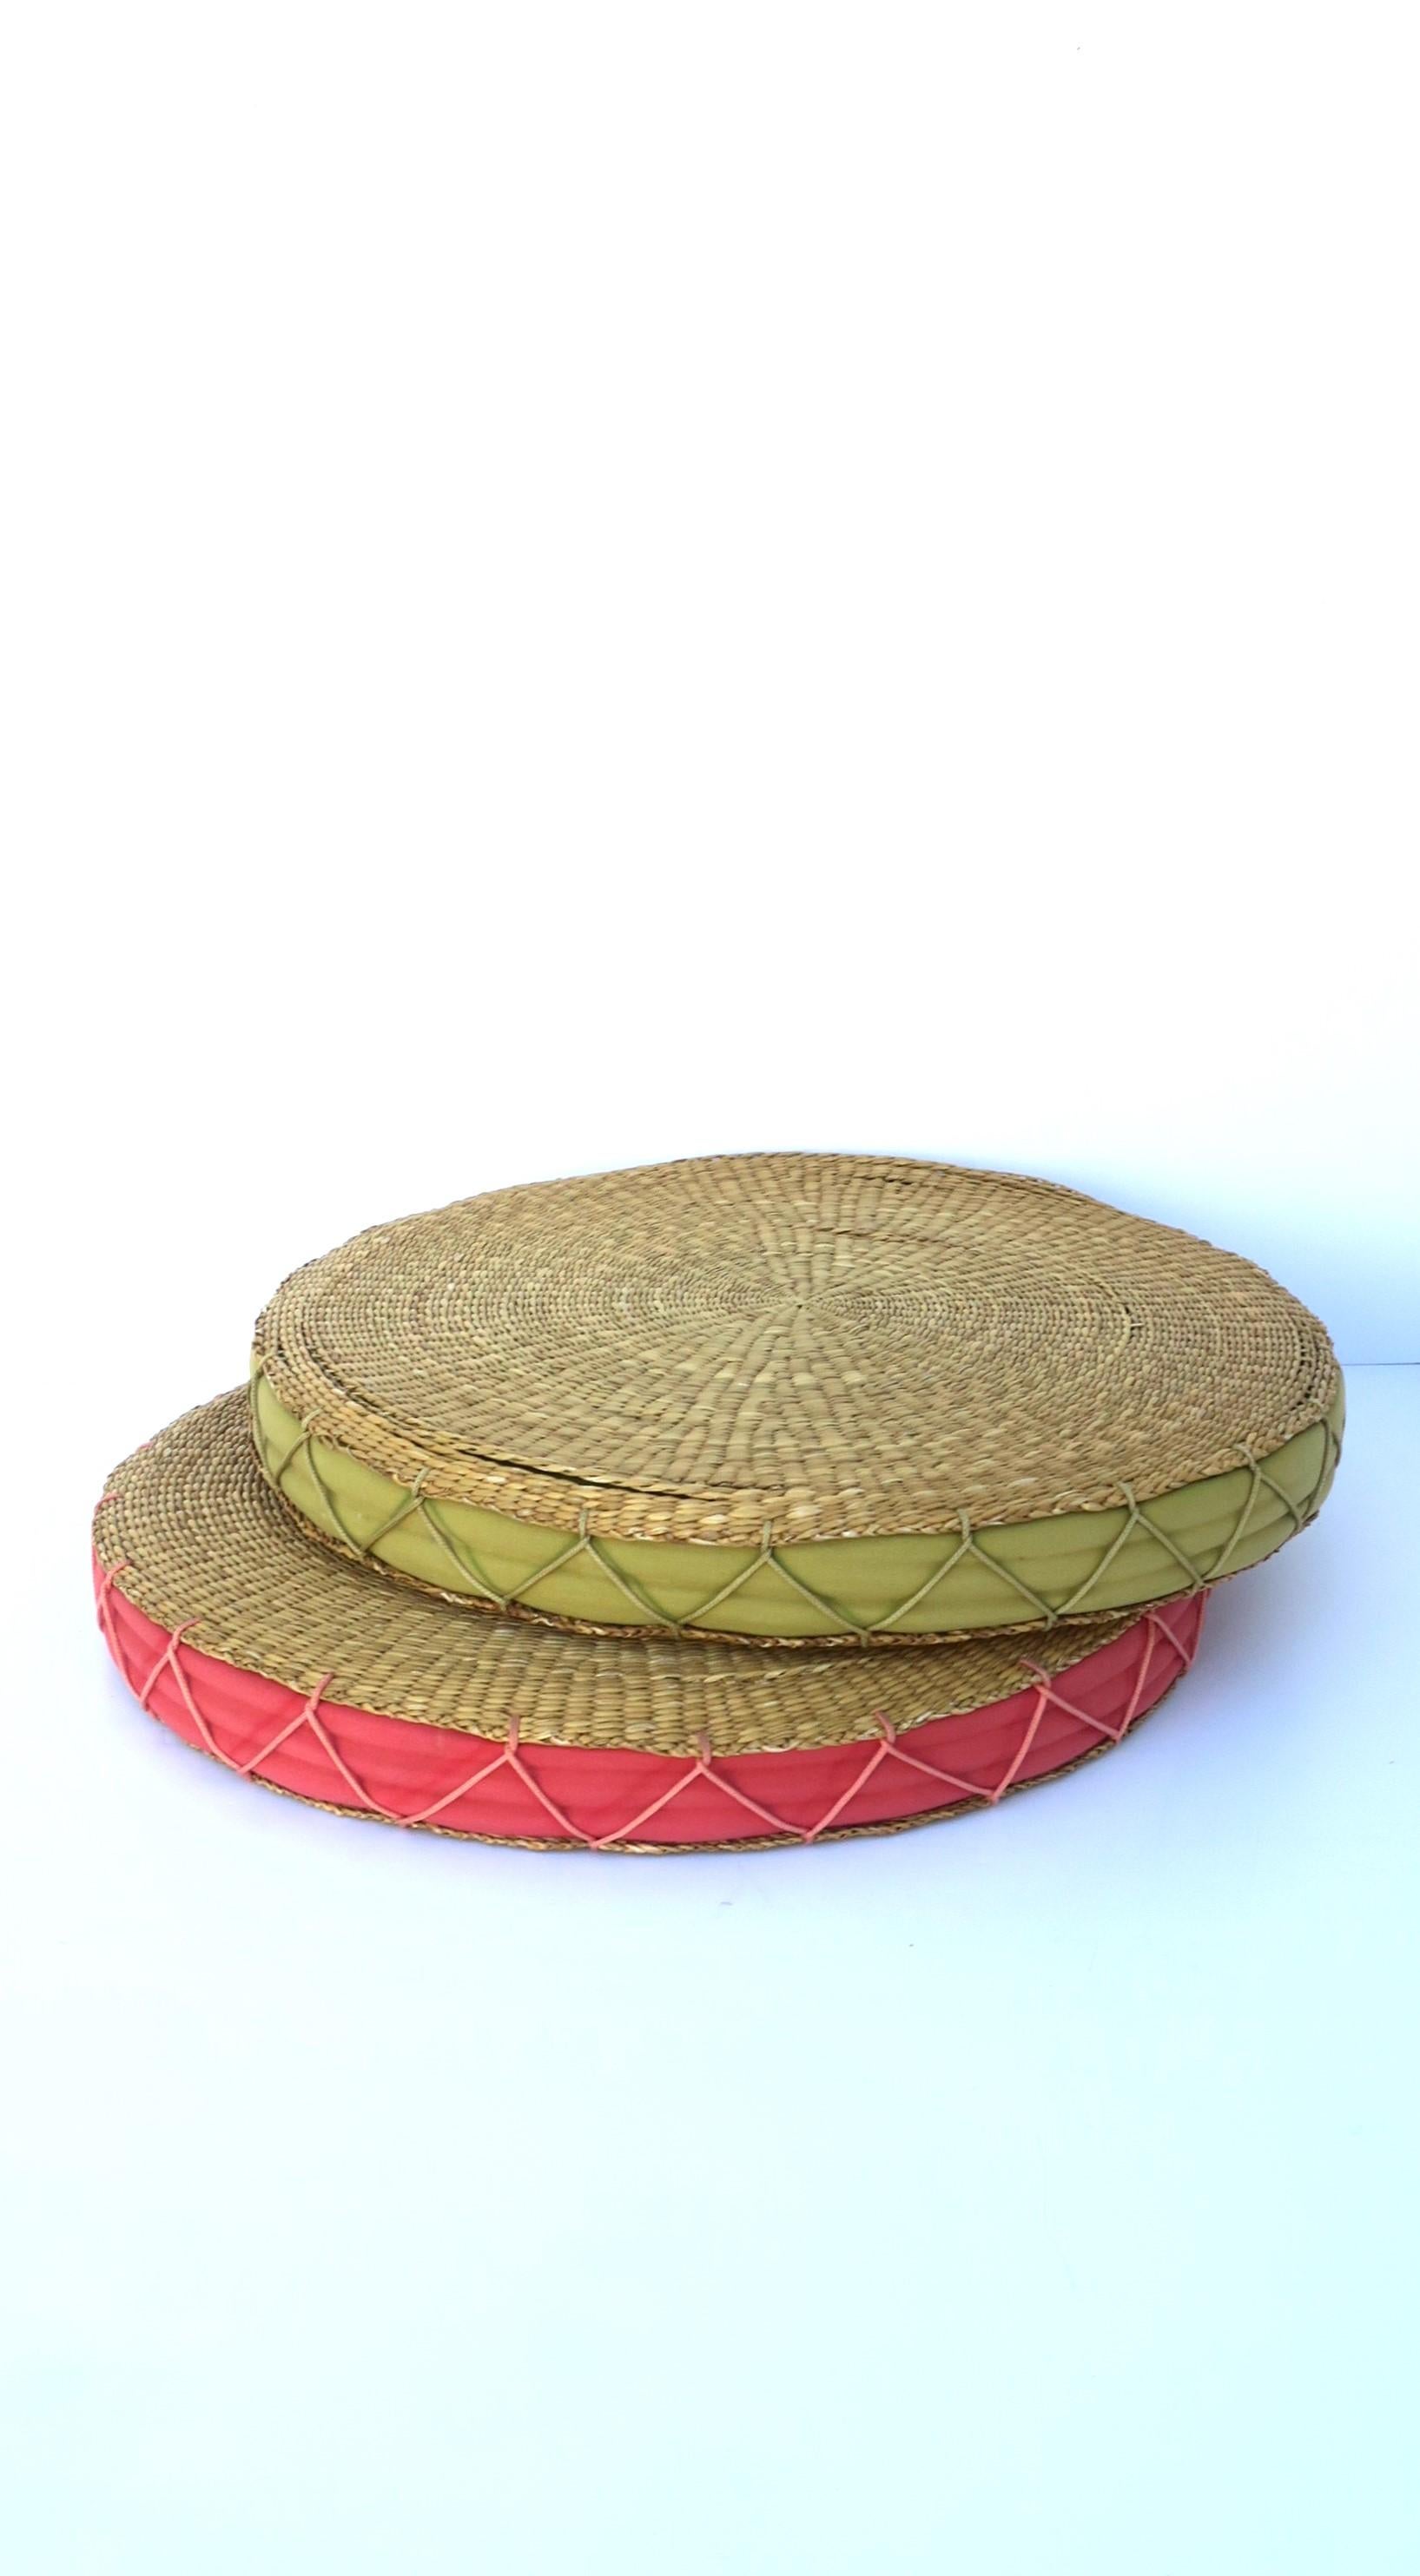 Wicker Seat or Floor Cushion, Green and Tan For Sale 1